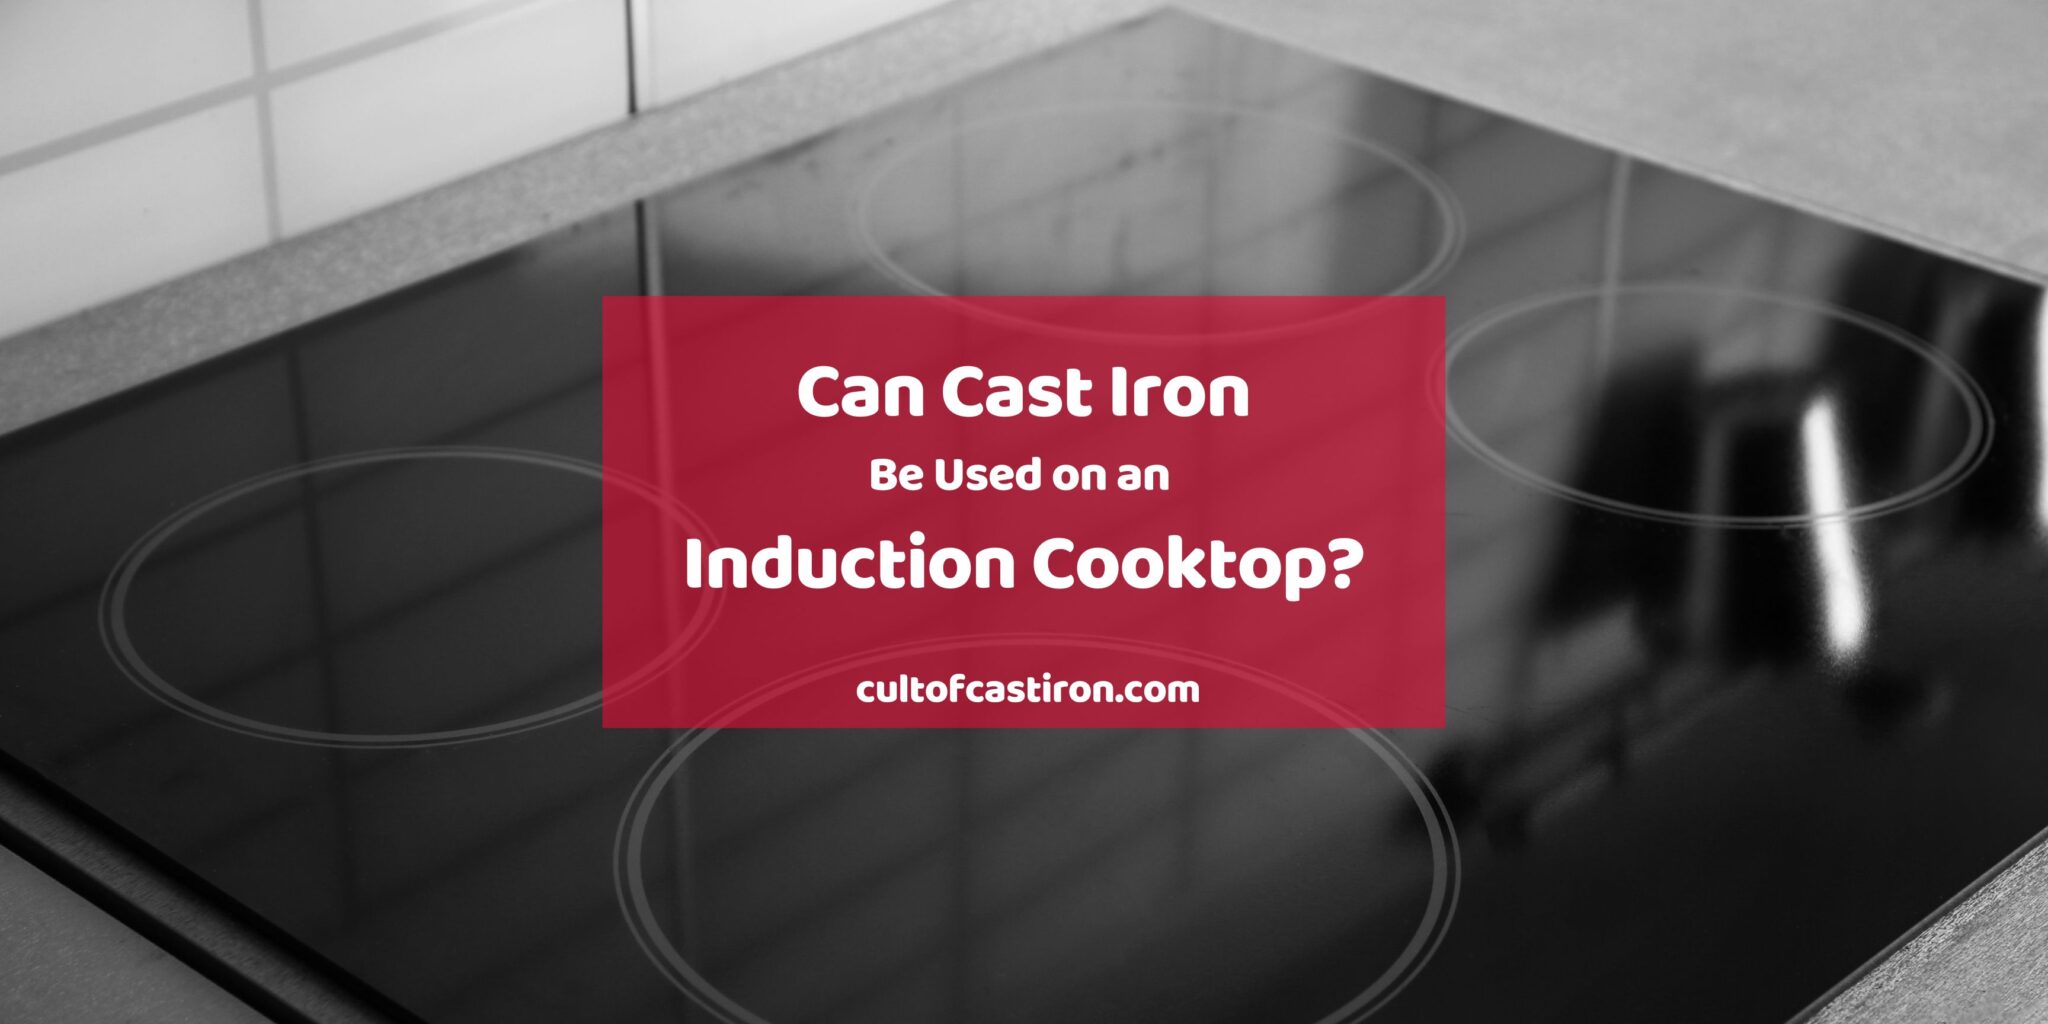 can-cast-iron-be-used-on-an-induction-cooktop-yes-here-s-why-cult